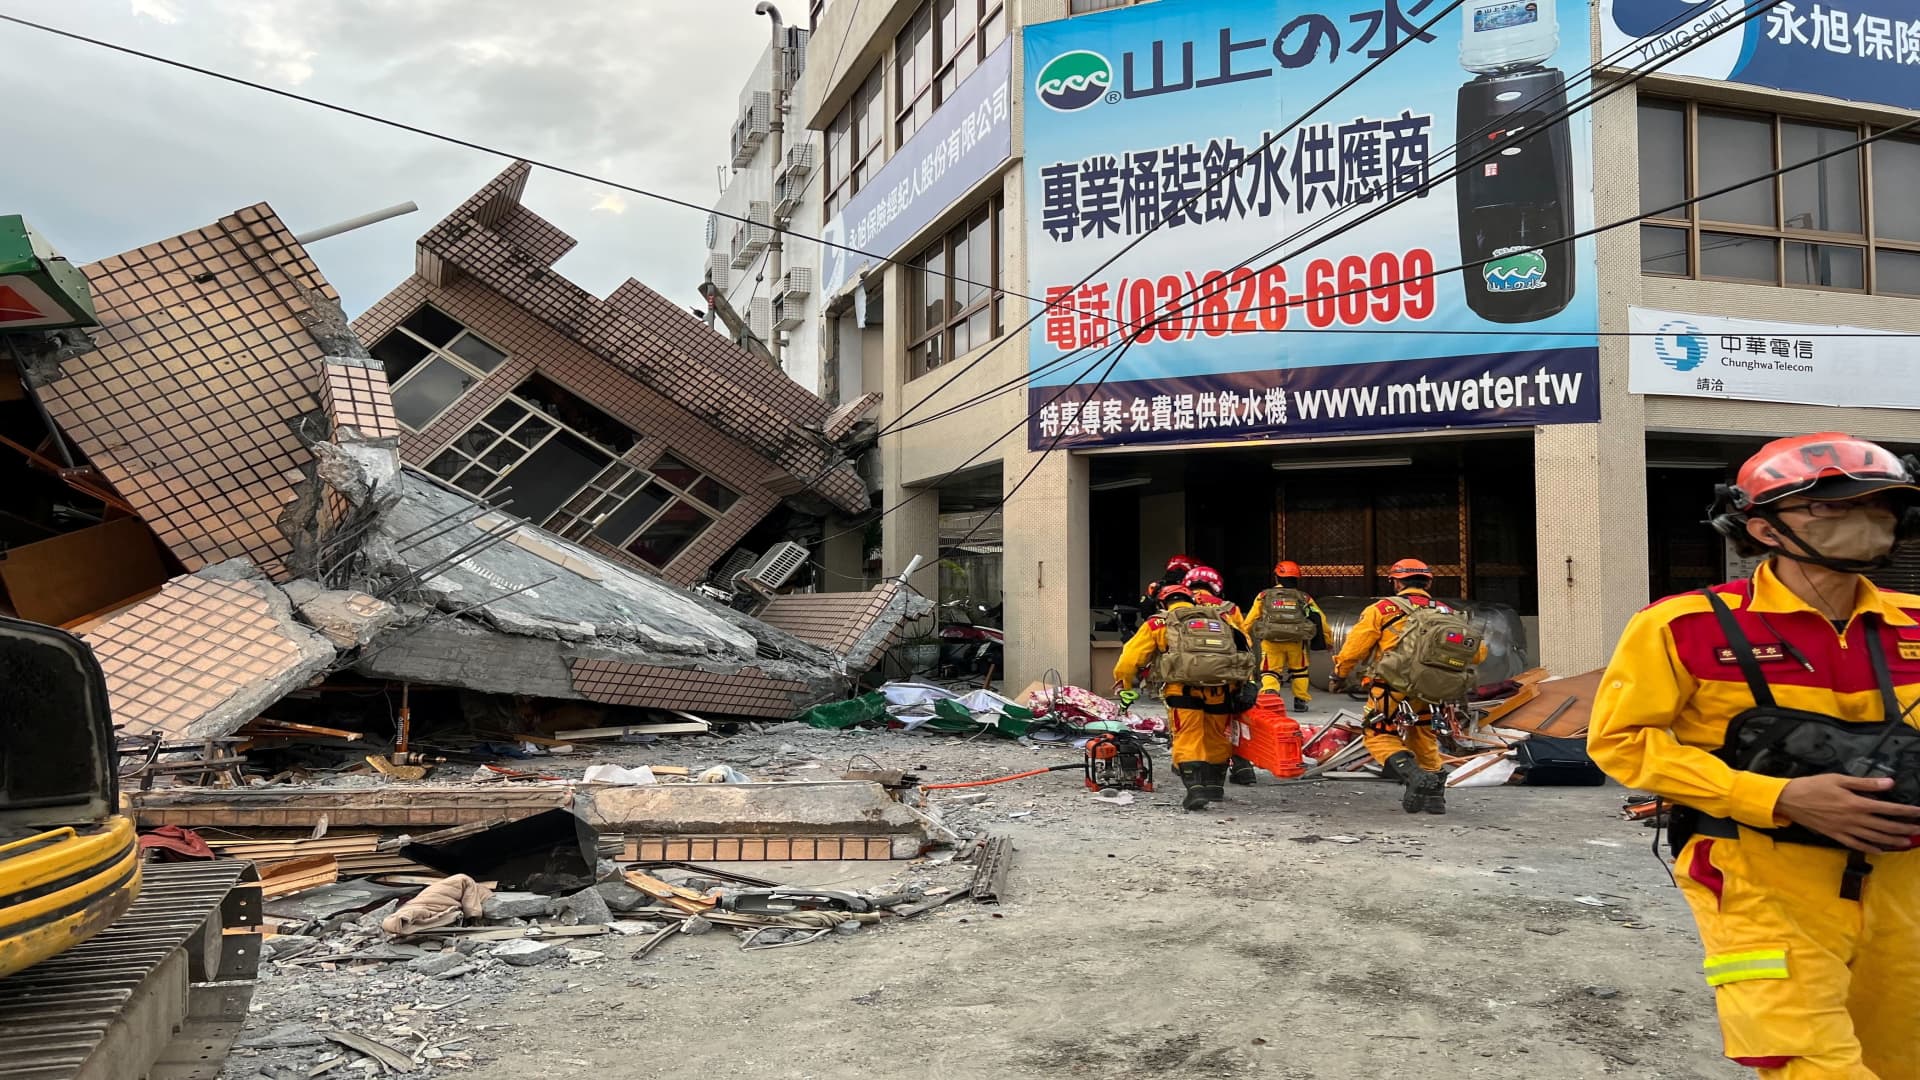 Taiwan’s strongest earthquake in nearly 25 years damages buildings and causes a small tsunami